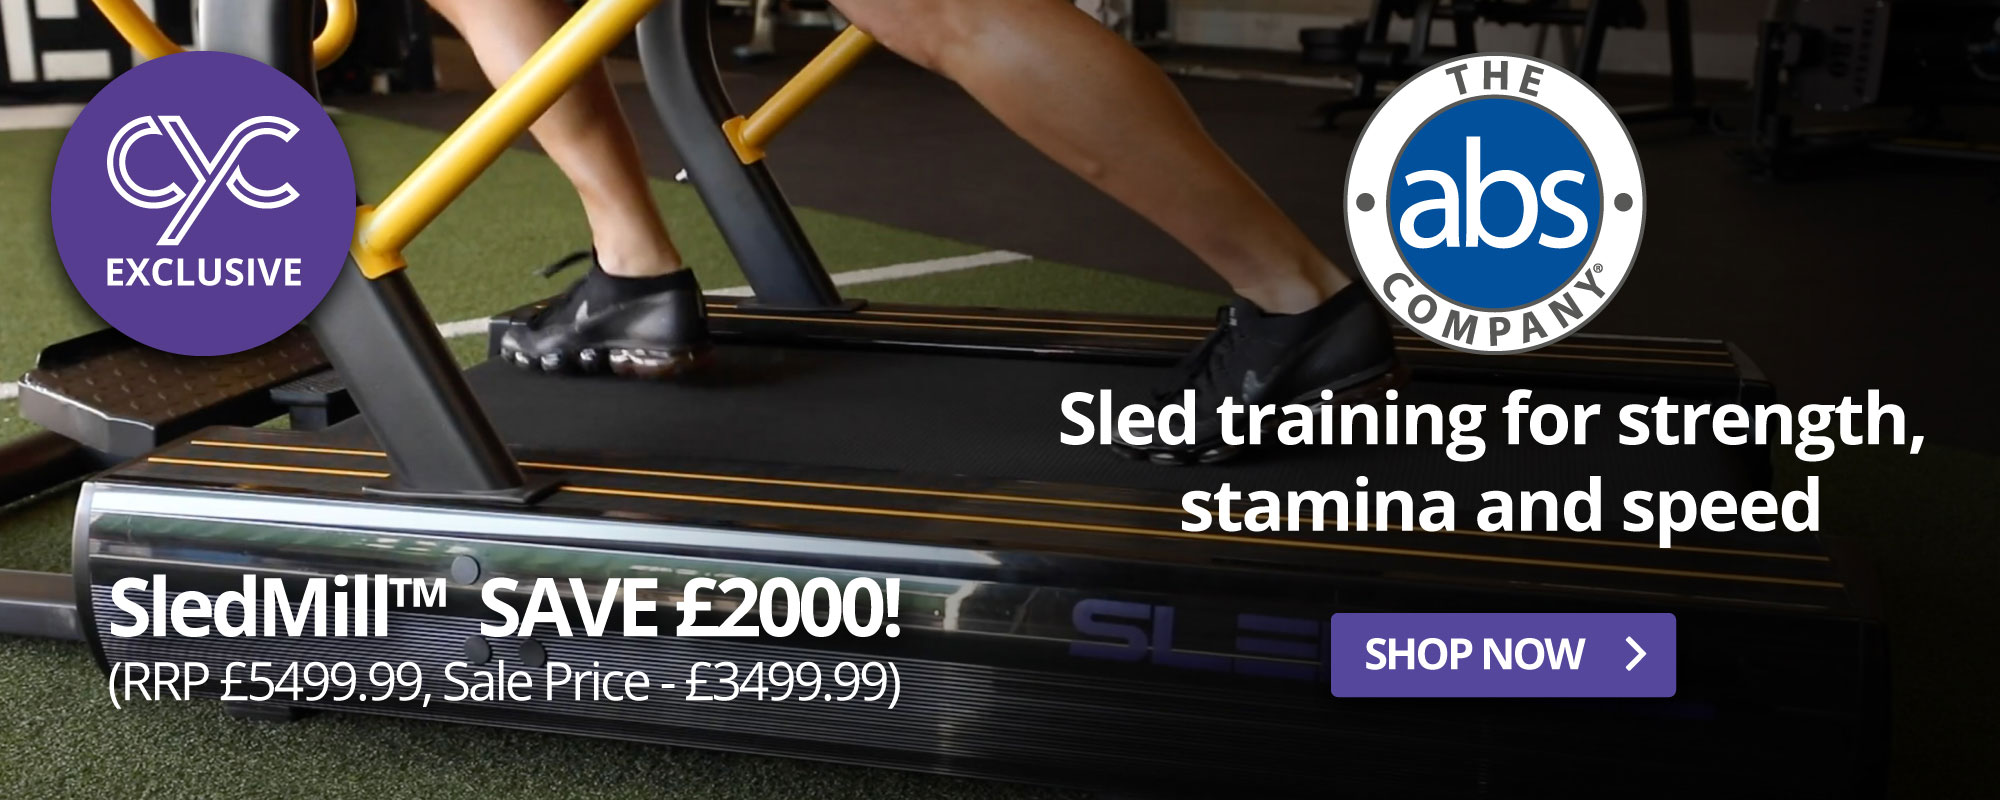 The Abs Company - Sled training for strength stamina and speed. SledMill SAVE £2000 (RRP £5499.99, Sale Price £3499.99 - Shop Now